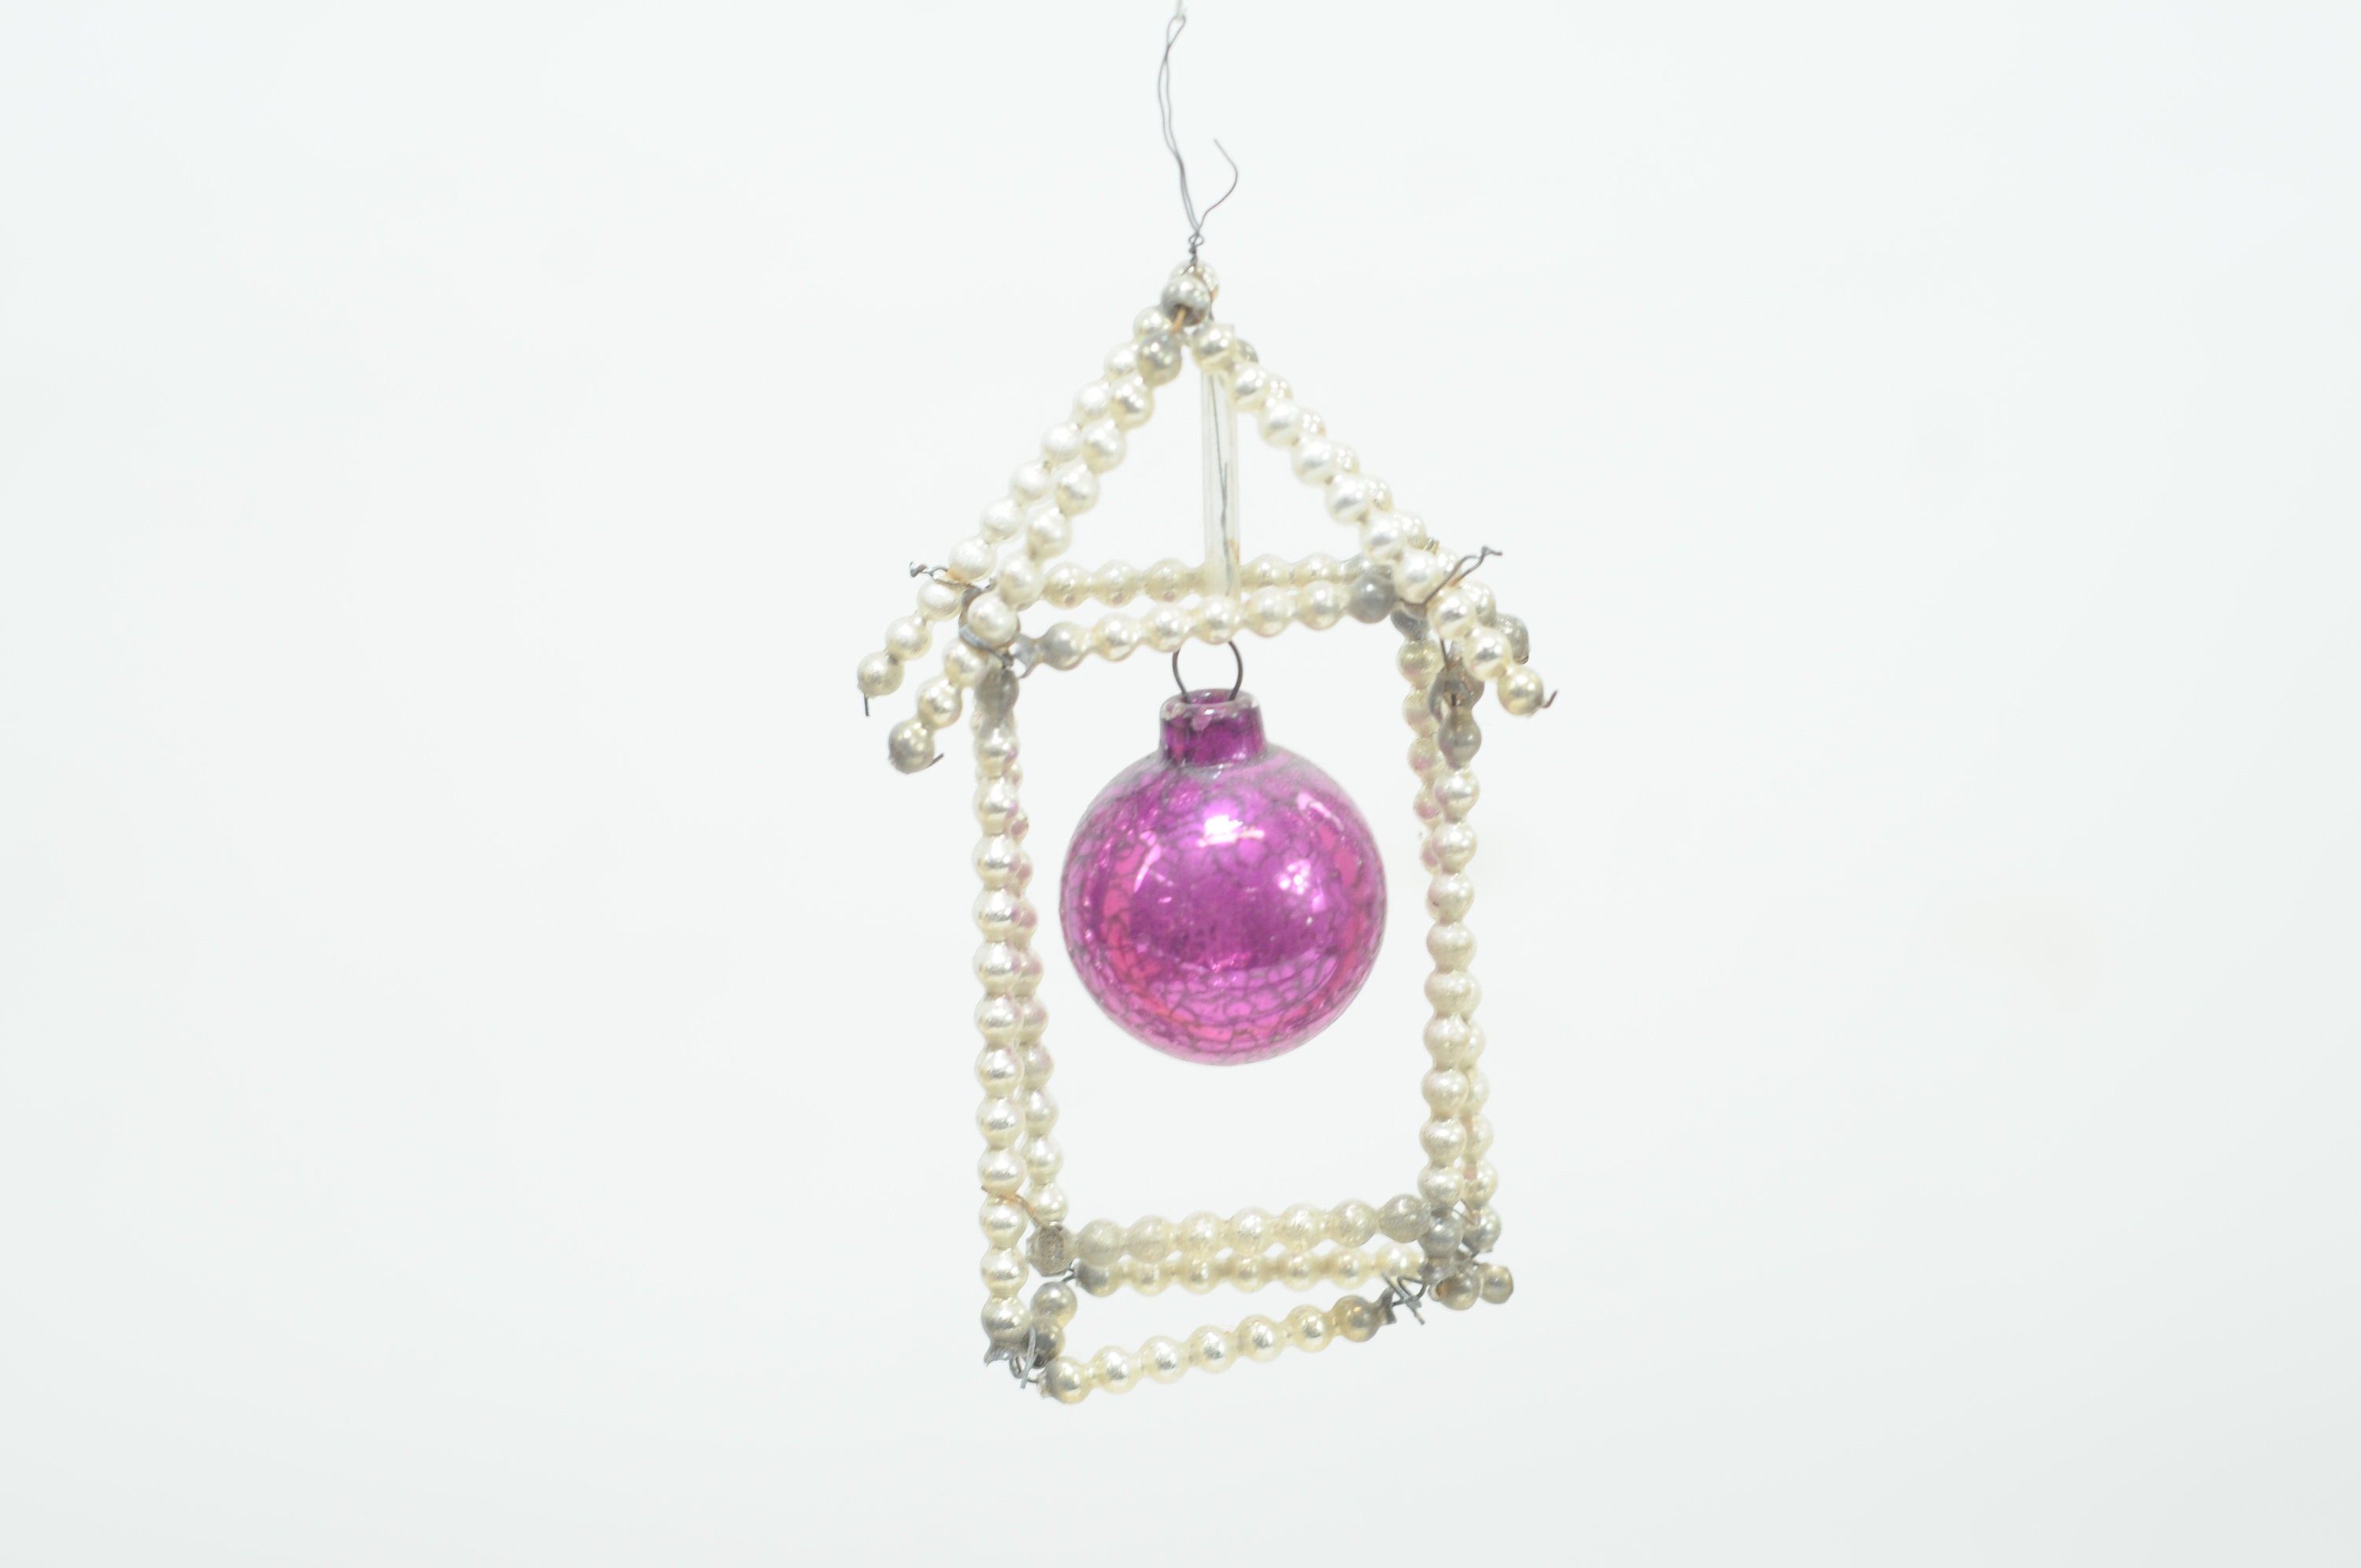 Antique House Shape Christmas Ornament Glass Bead Christmas Ornament With  Wire Iridescent White Purple and Silver Beads (Box #79.+)